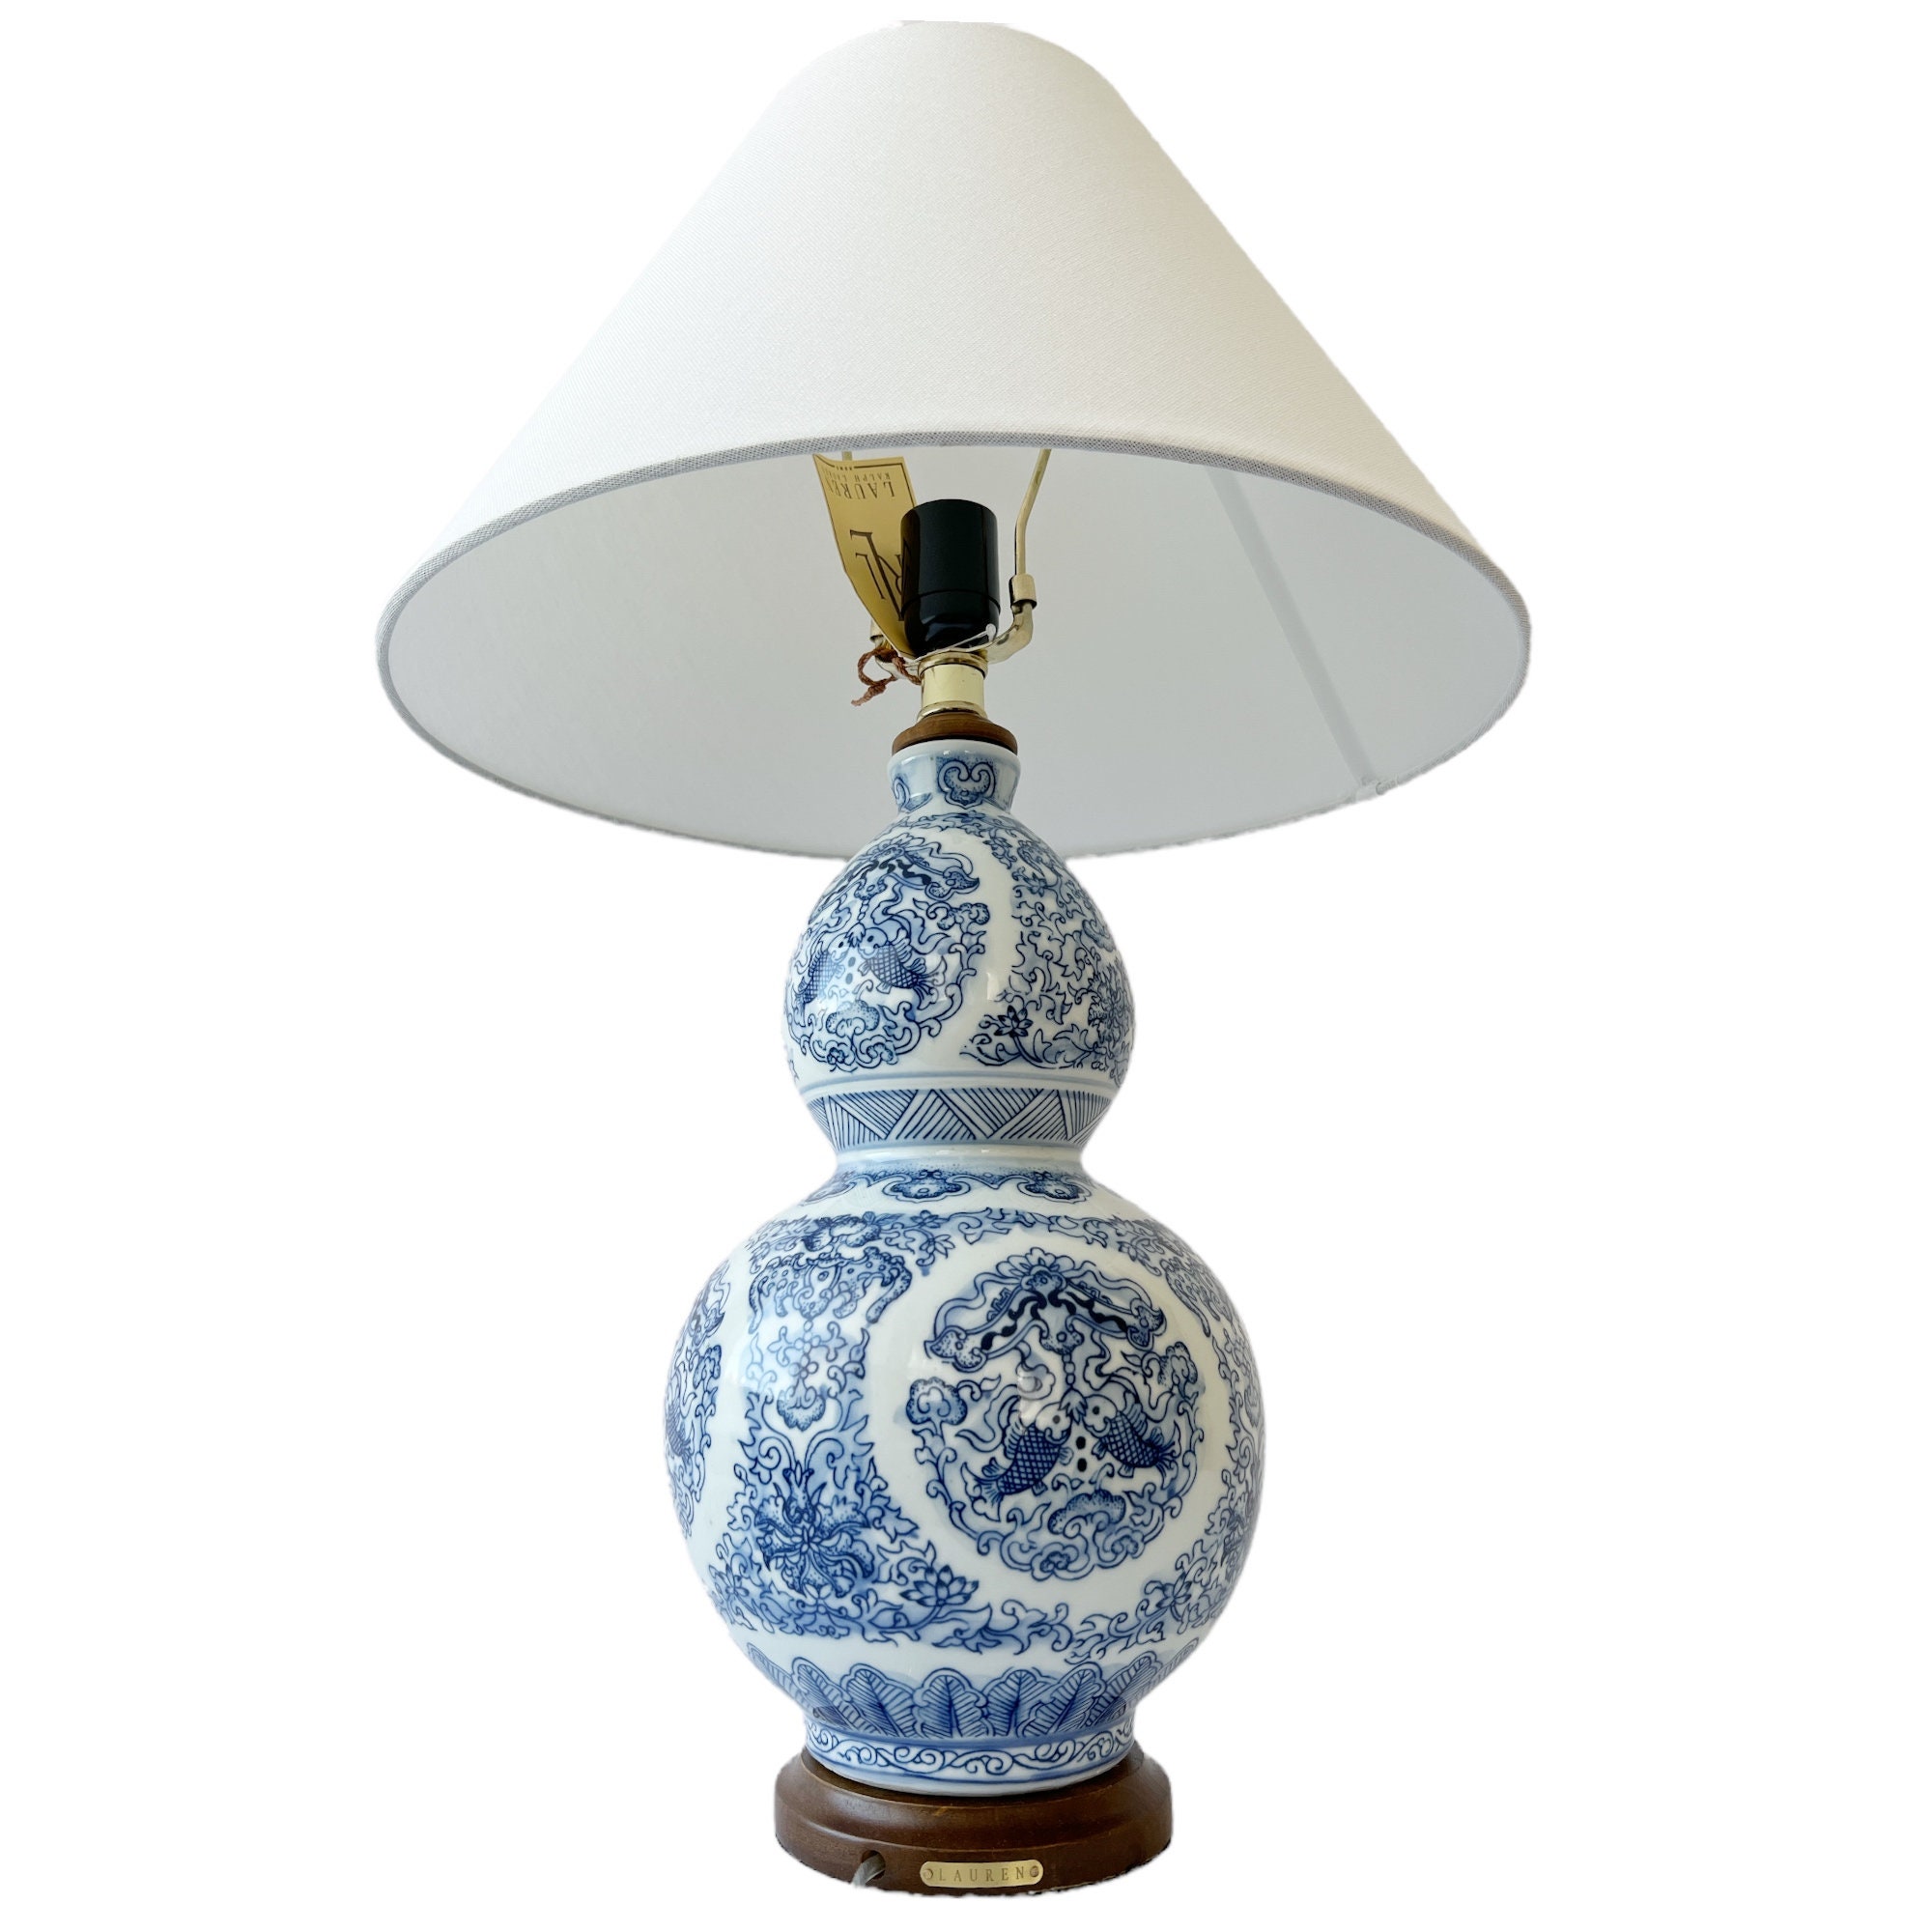 Ralph Lauren Large Lamp. Blue and White. - Etsy New Zealand